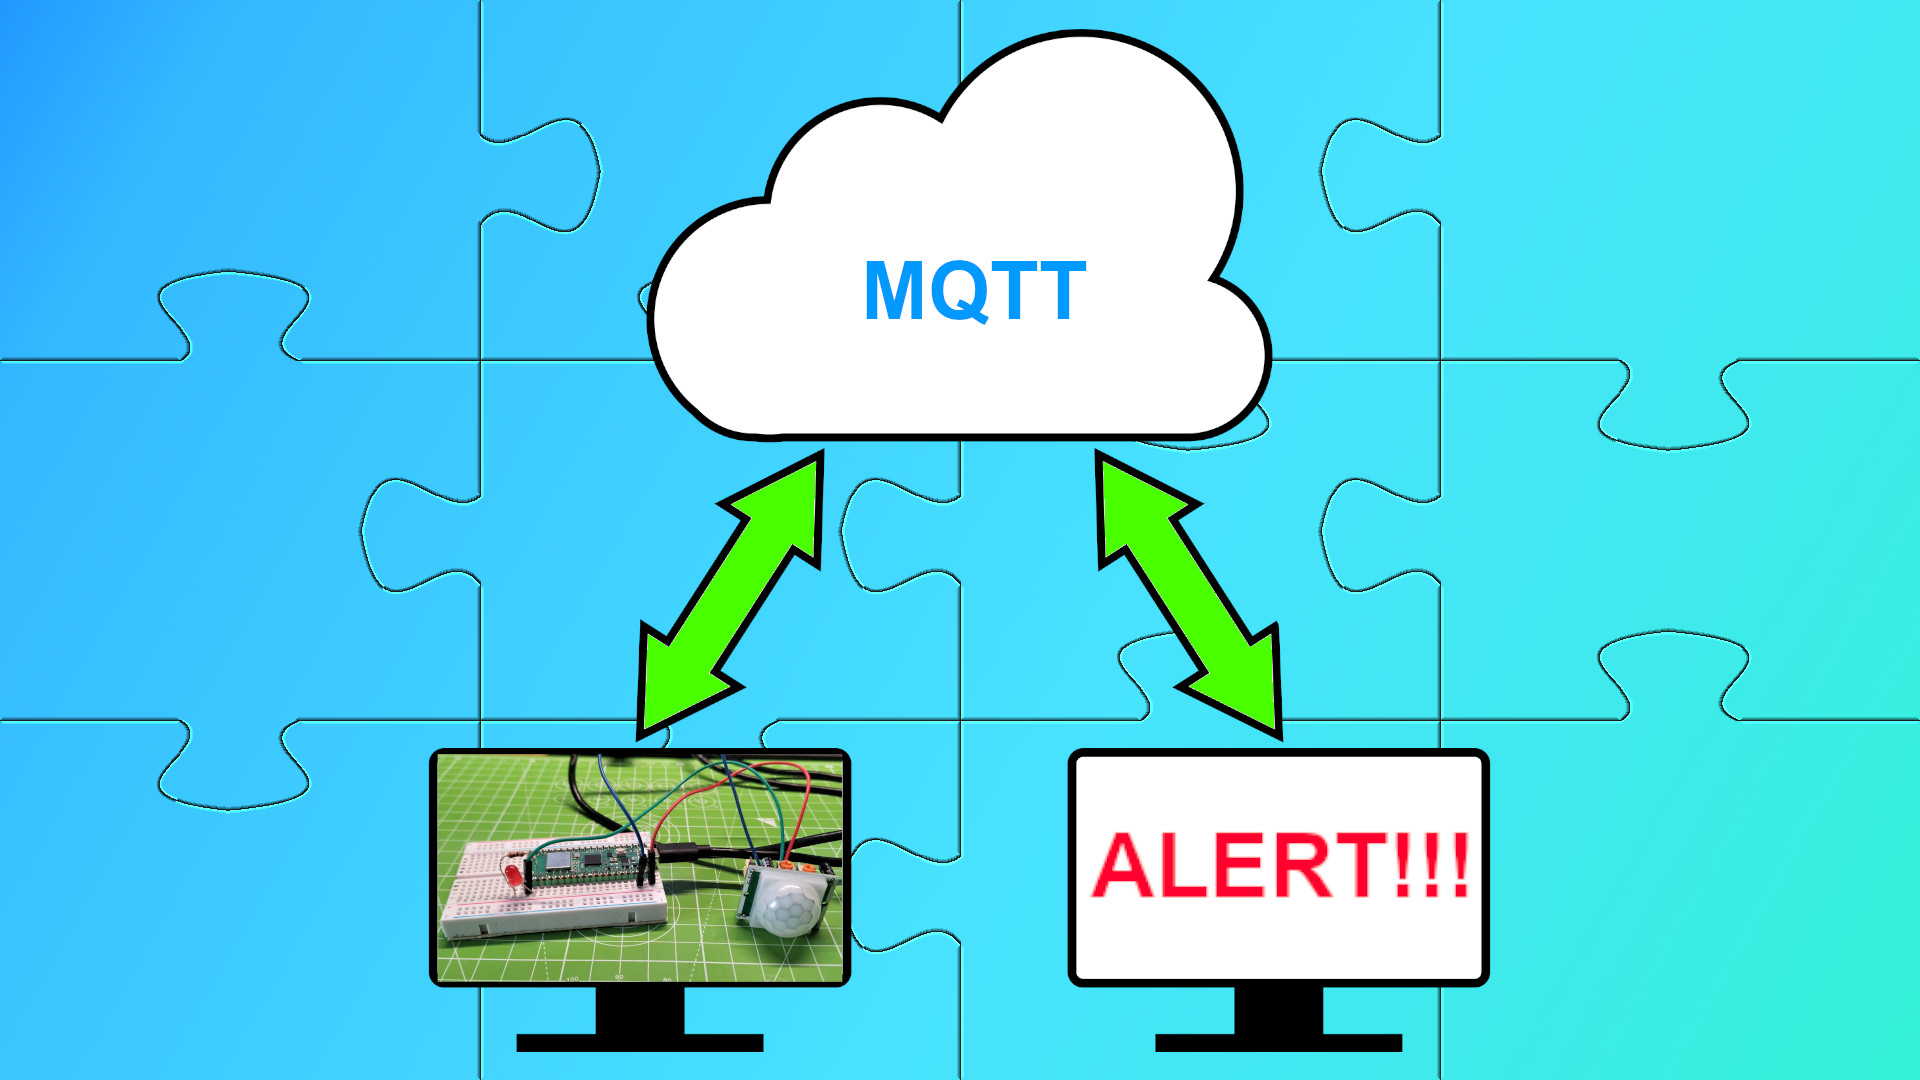 Using MQTT with the Raspberry Pi Pico W and HomeAssistant for an